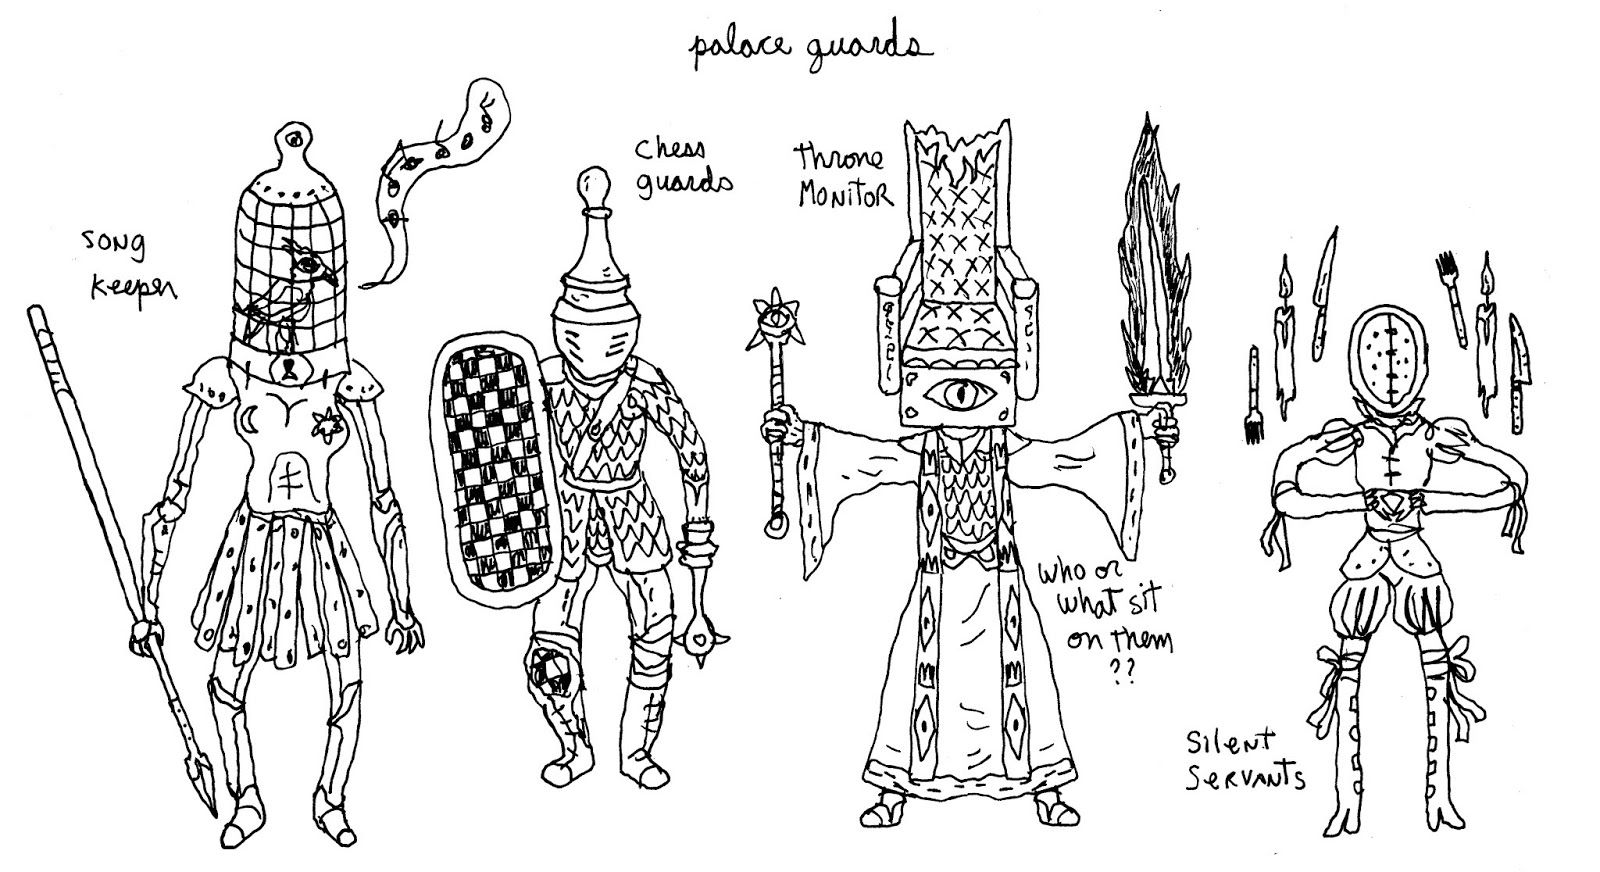 Four sketched figures. The Song Keeper is an armored guard with a spear and a birdcage for a head. Chess Guards have checkerboard shields and pawns for heads. The Throne Monitor has a throne for head with a single eye. They hold aloft a flaming sword and a mace with an eye in the head, and are captioned “who or what sit on them??” The Silent Servants wear blank full-face masks surrounded by levitating cutlery and candles.